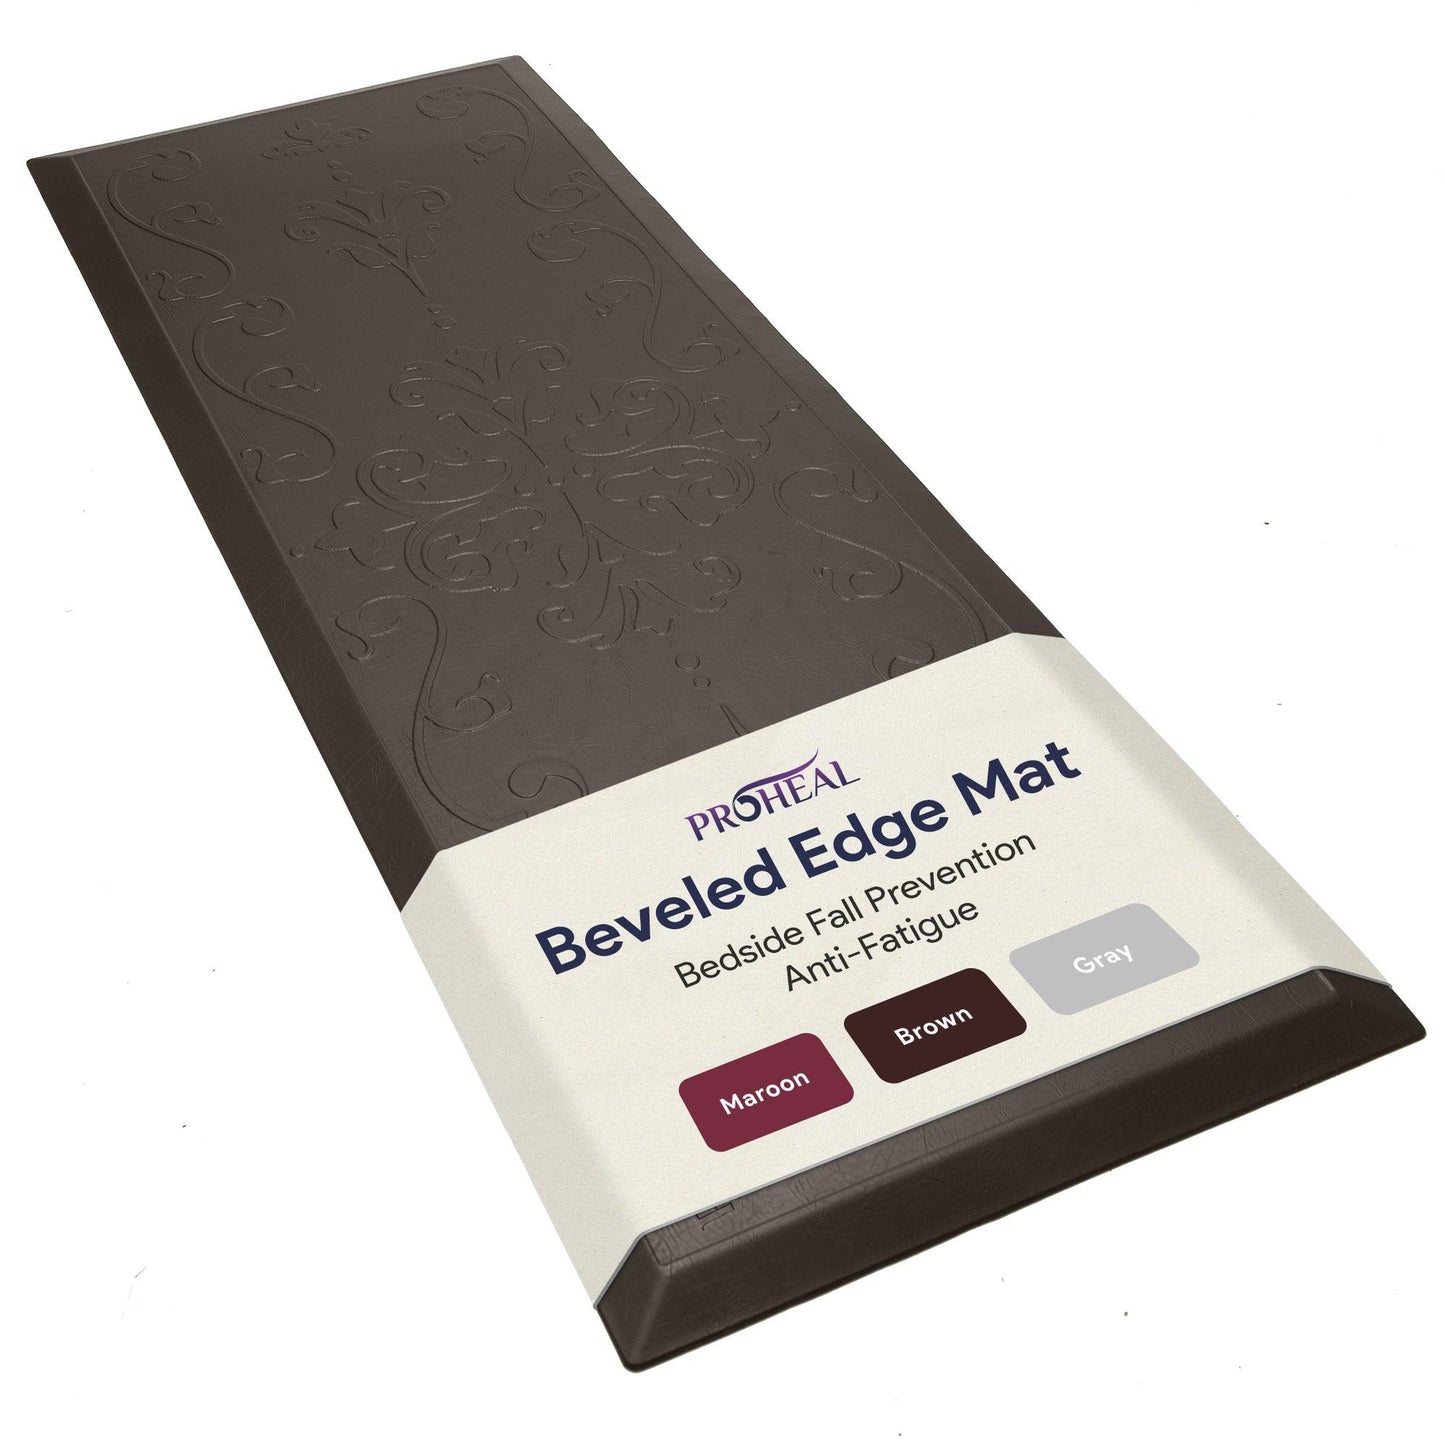 Beveled Bedside Fall Mat for Elderly - Brown - 4 Pack ProHeal